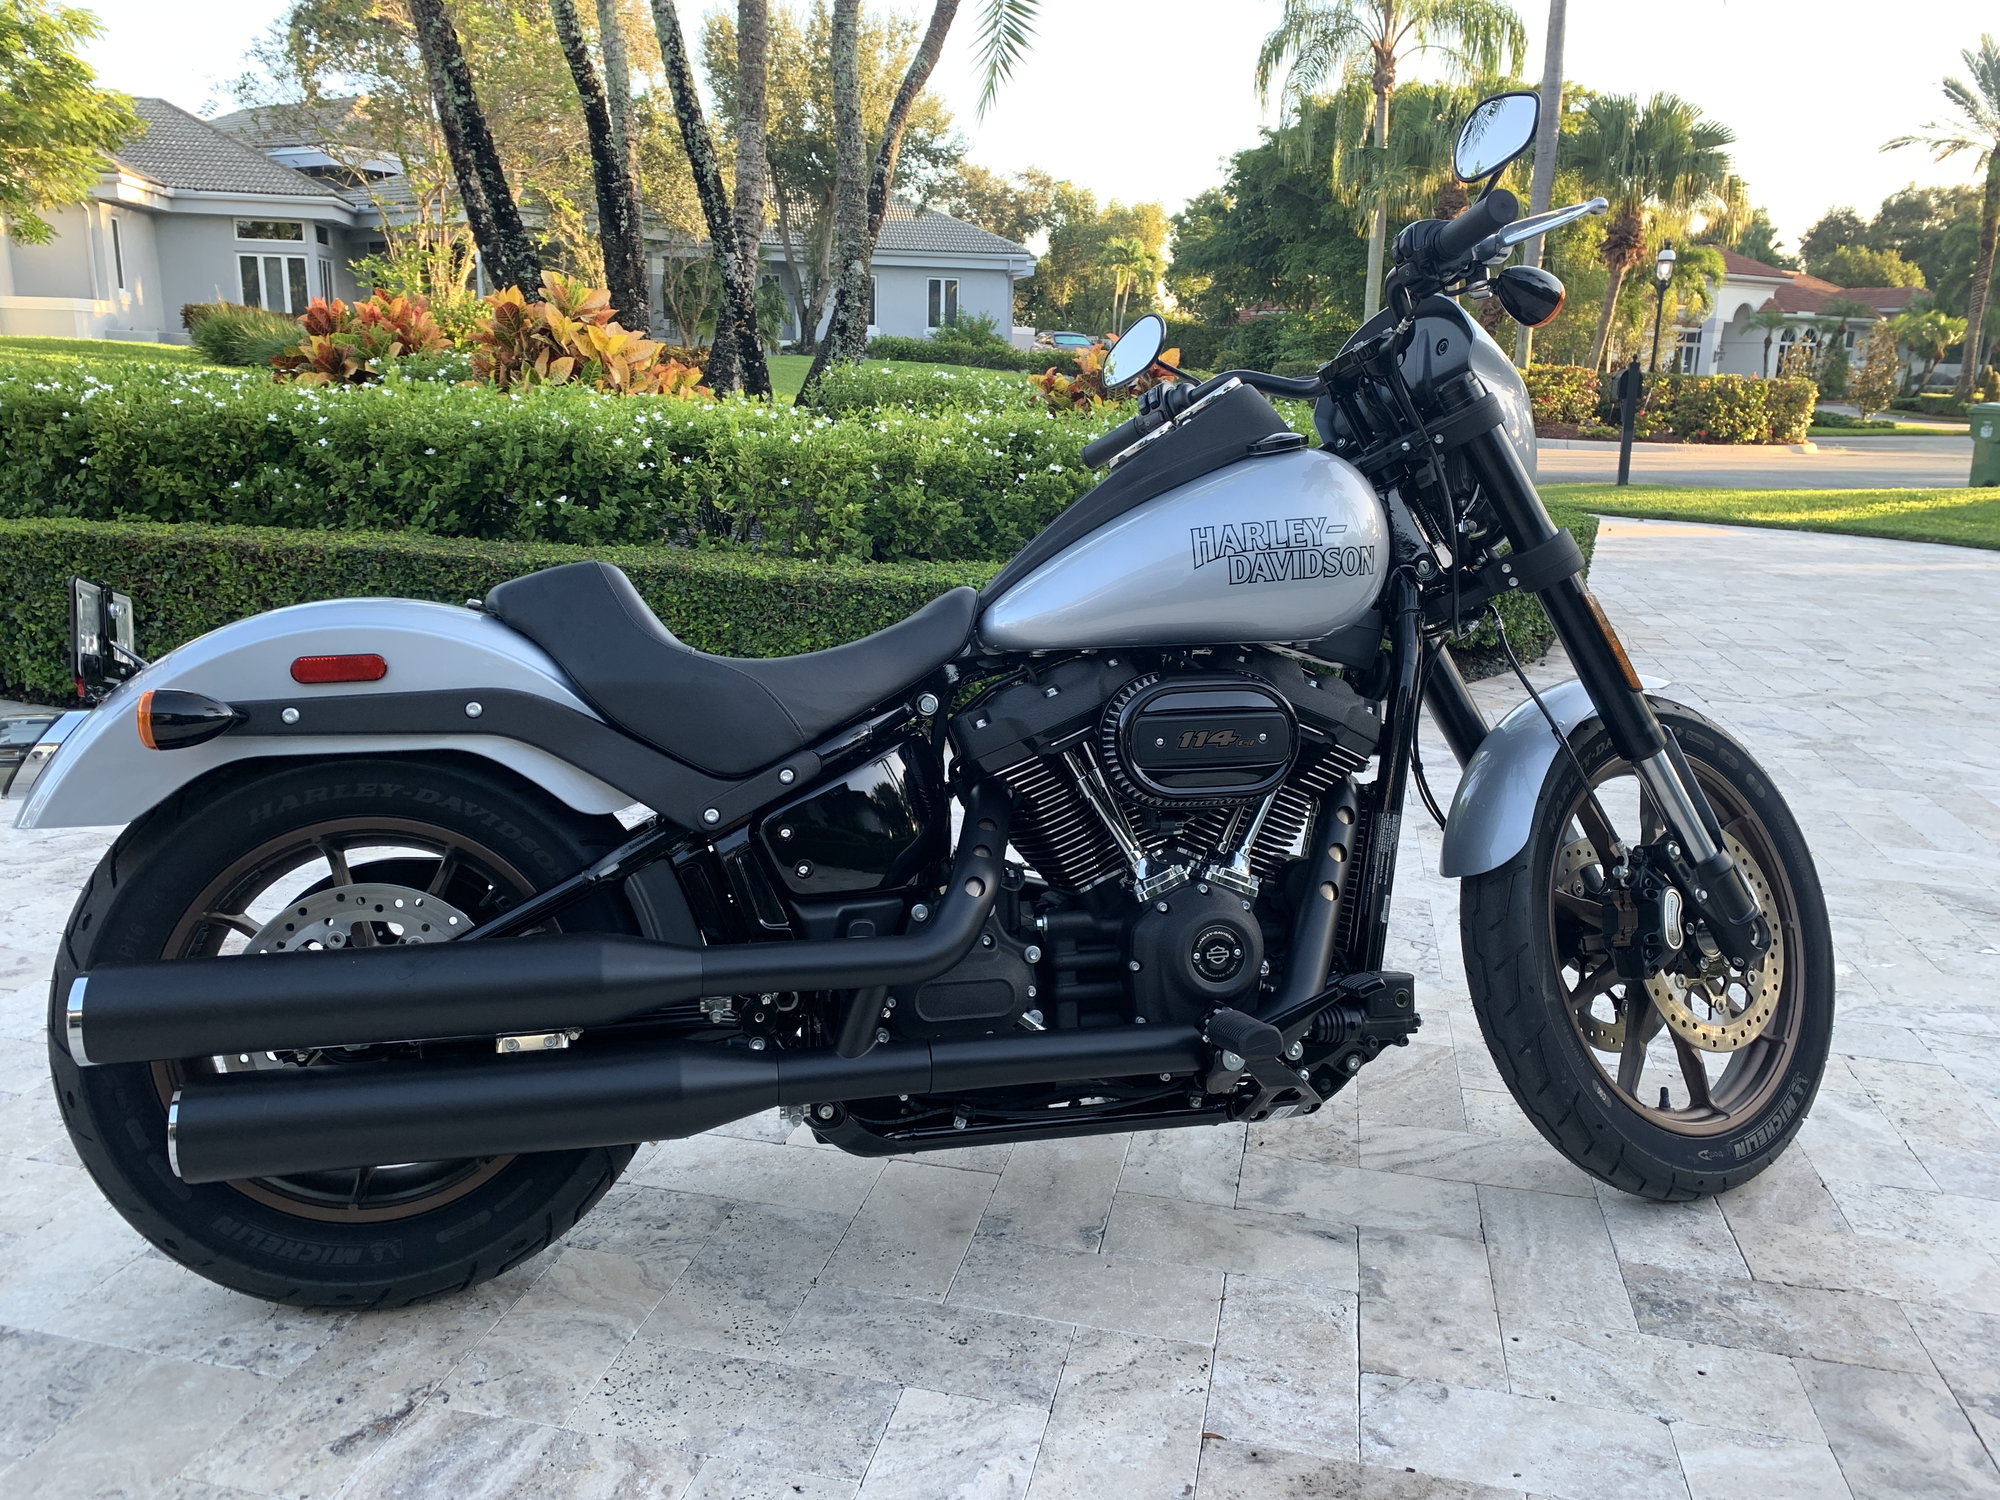 2020 Lowrider S Exhaust Pipe Recommendation Harley Davidson Forums